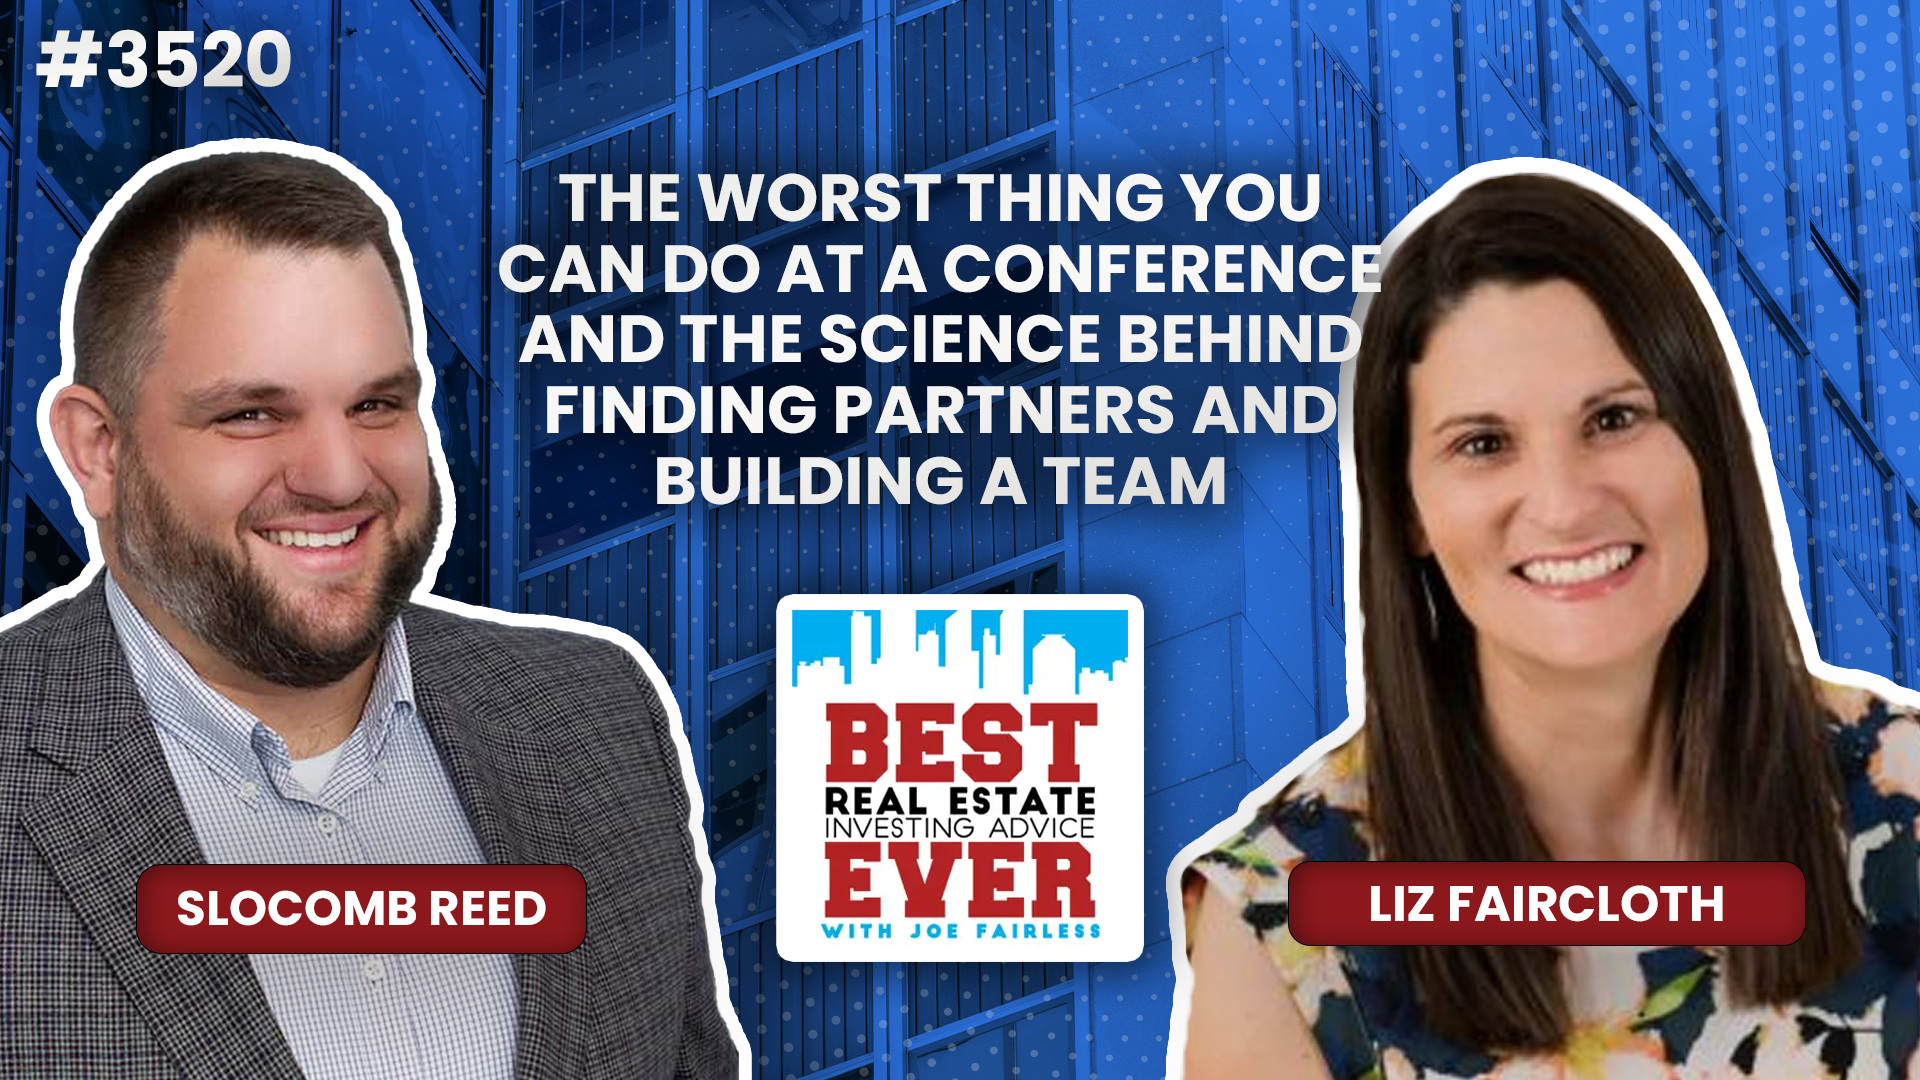 JF3520: The Worst Thing You Can Do at a Conference and the Science Behind Finding Partners and Building a Team ft. Liz Faircloth